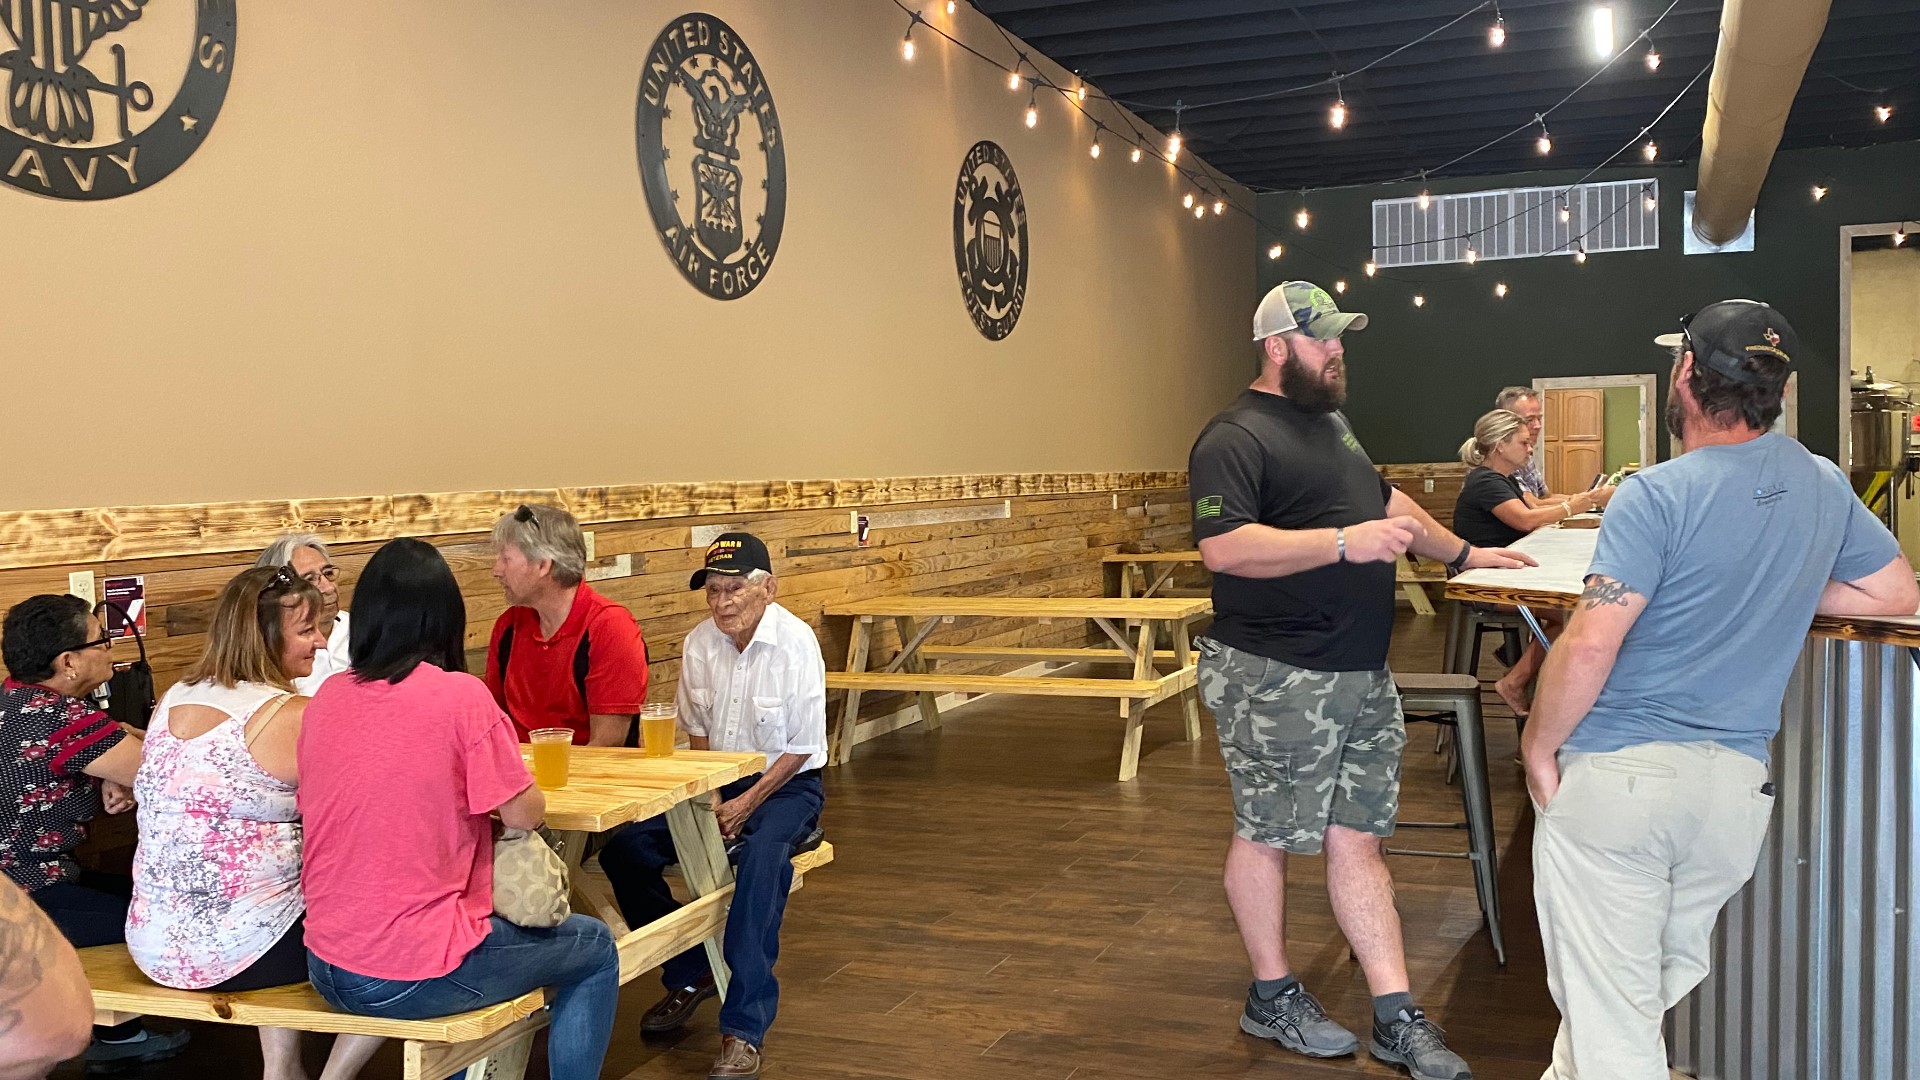 Temple's first craft brewery opened May 1 for pick-up orders during the statewide stay-at-home order. Now, it officially opened its doors and welcomed people in.